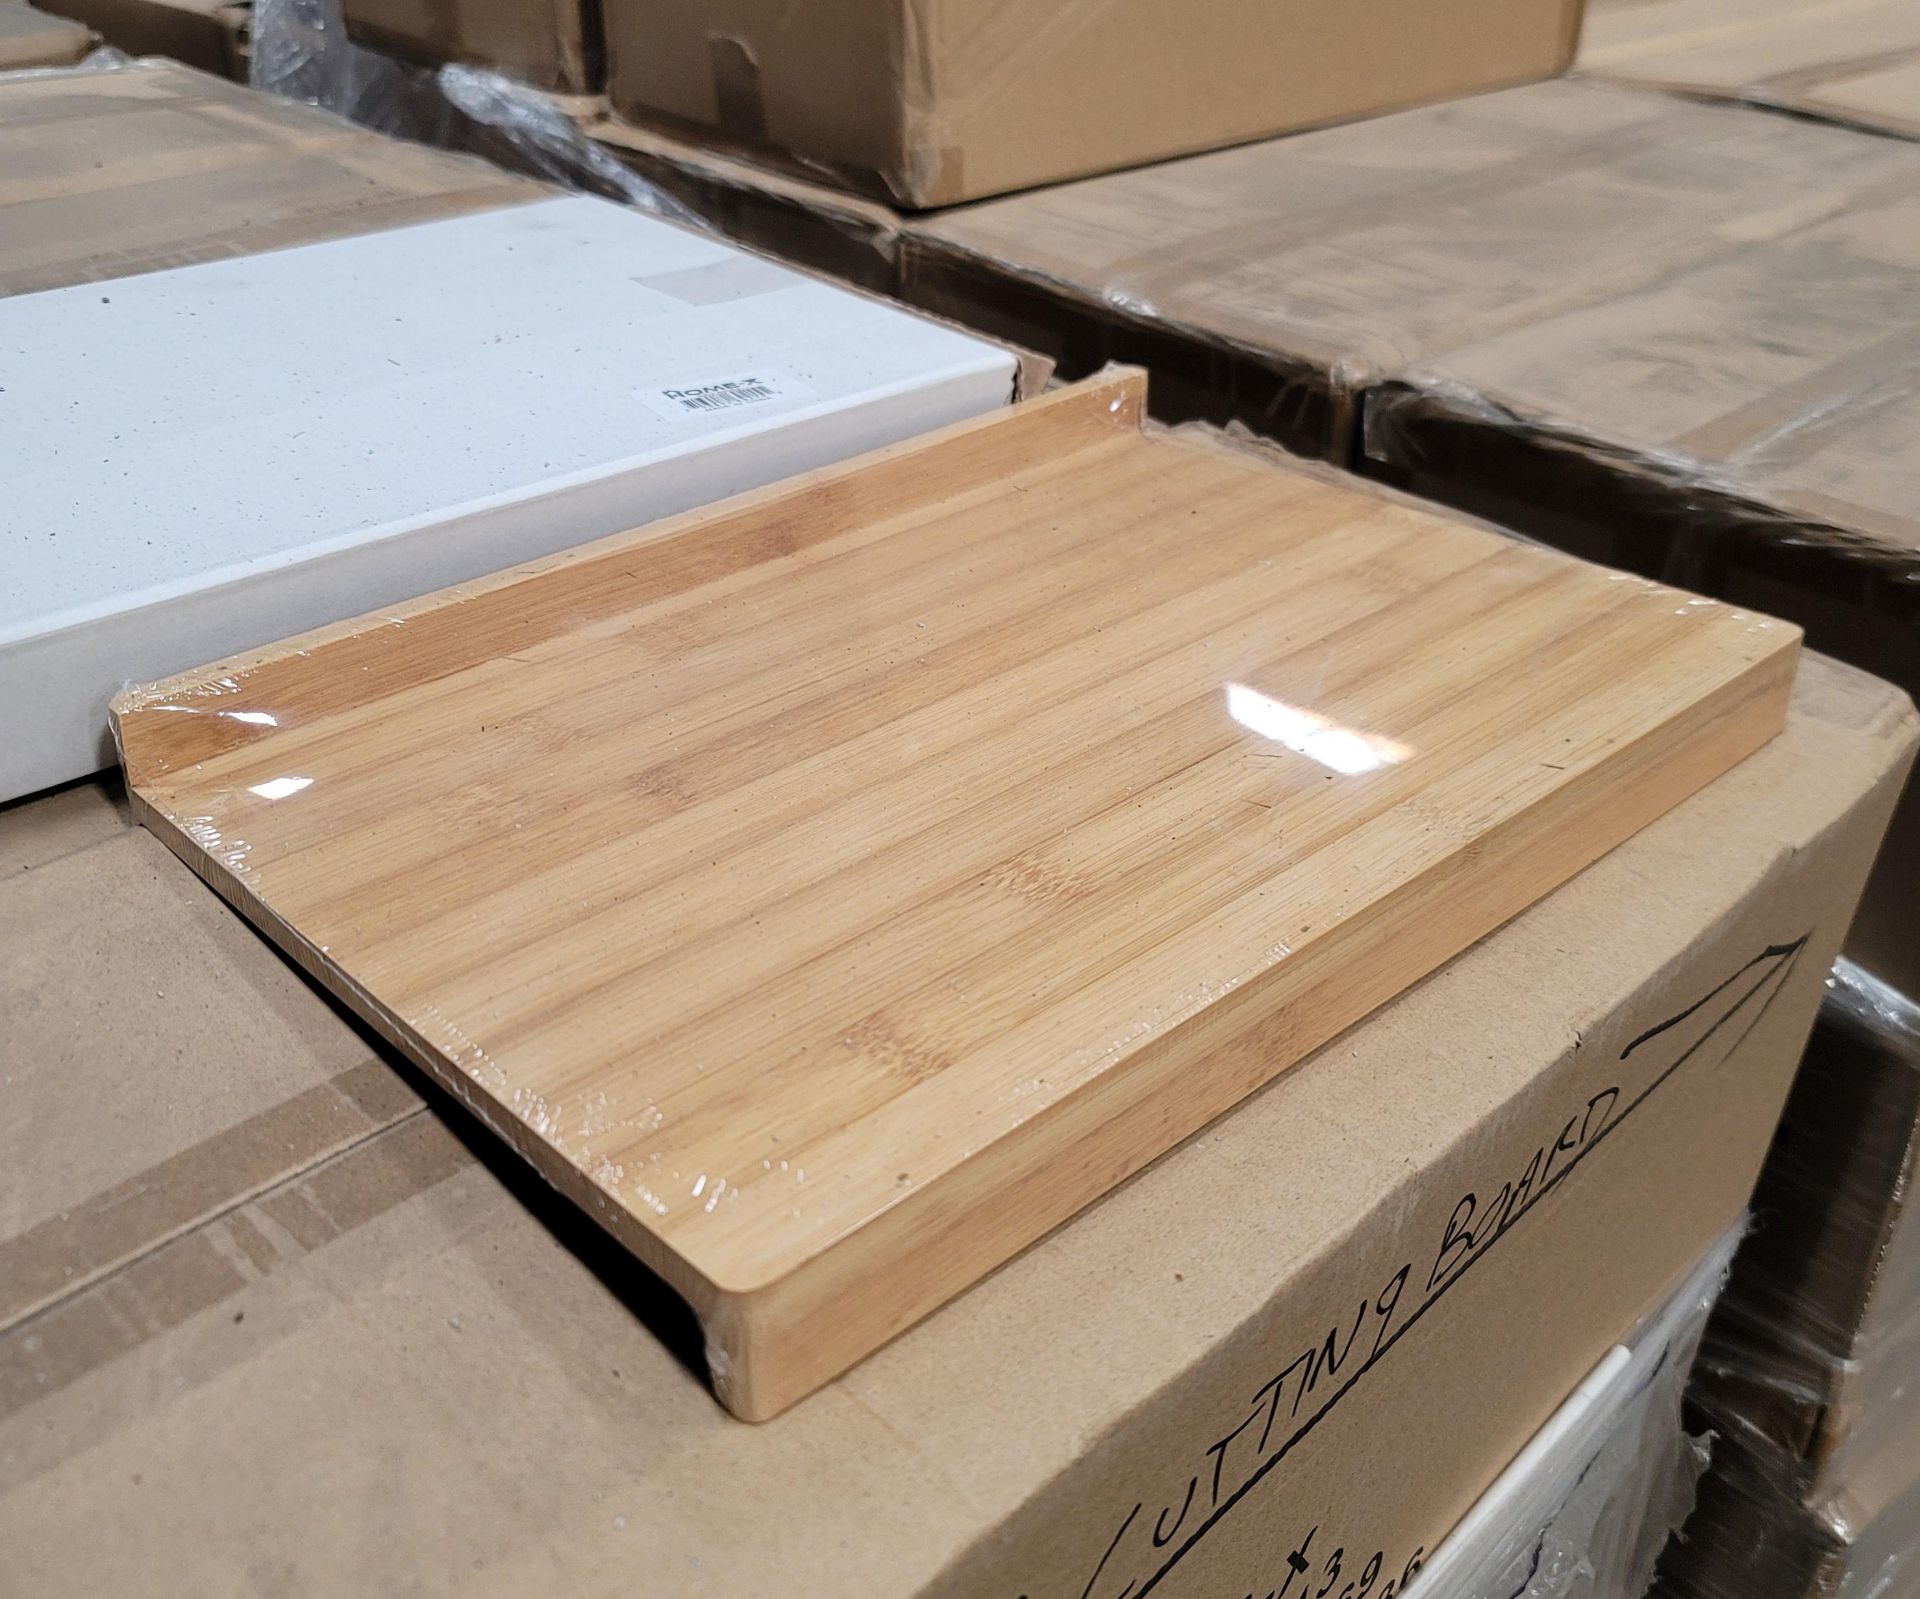 LOT - PALLET OF (288) WOOD REVERSIBLE CUTTING BOARD, (24 CASES/12 PER CASE)